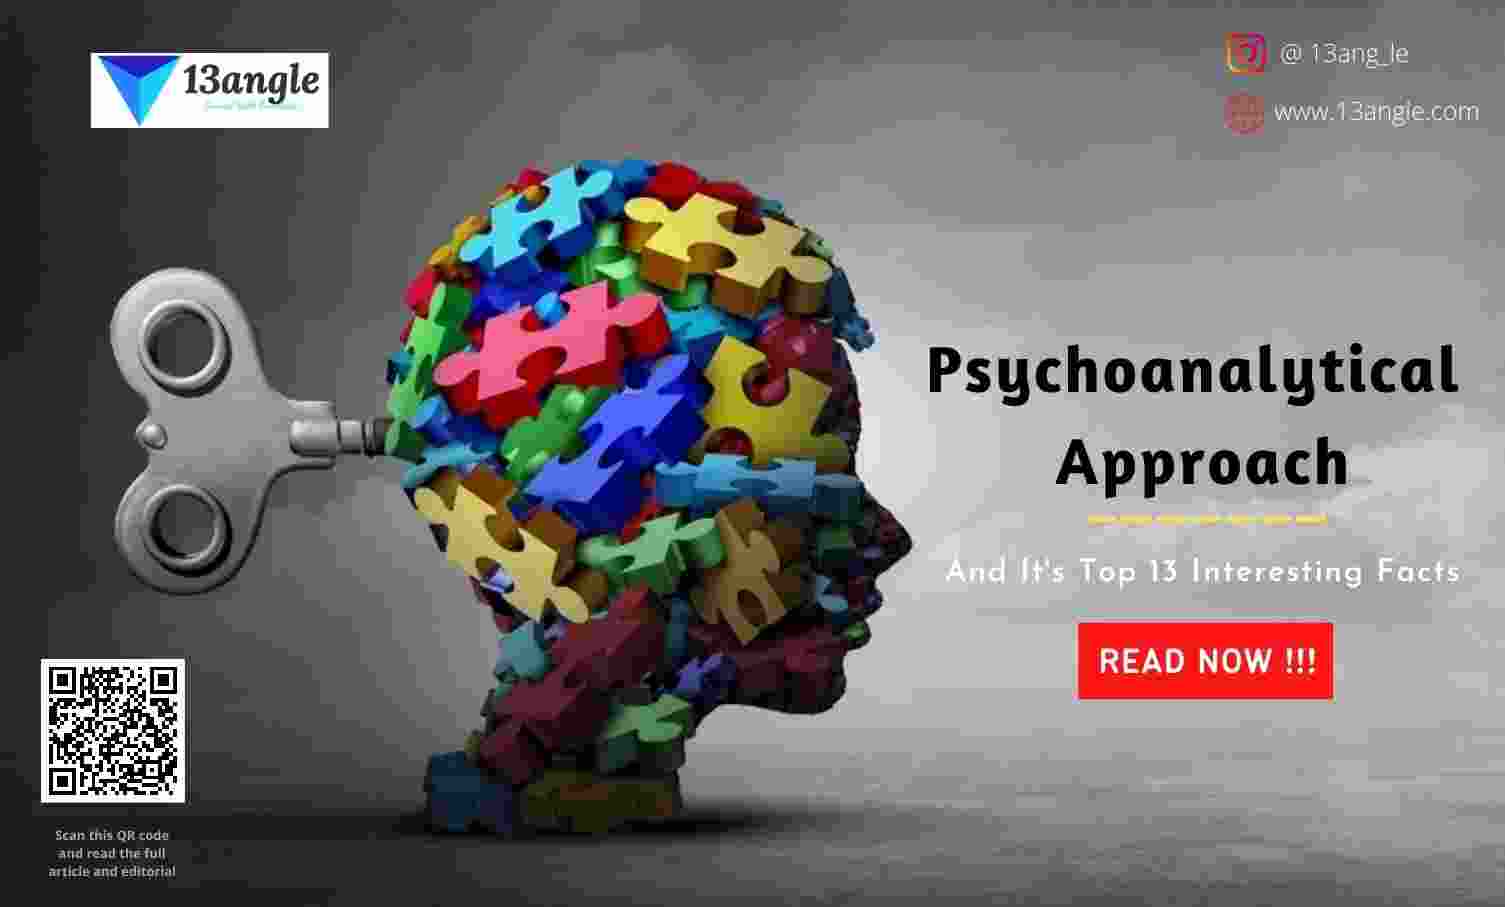 Psychoanalytical Approach And It's Top 13 Interesting Facts- 13angle.com